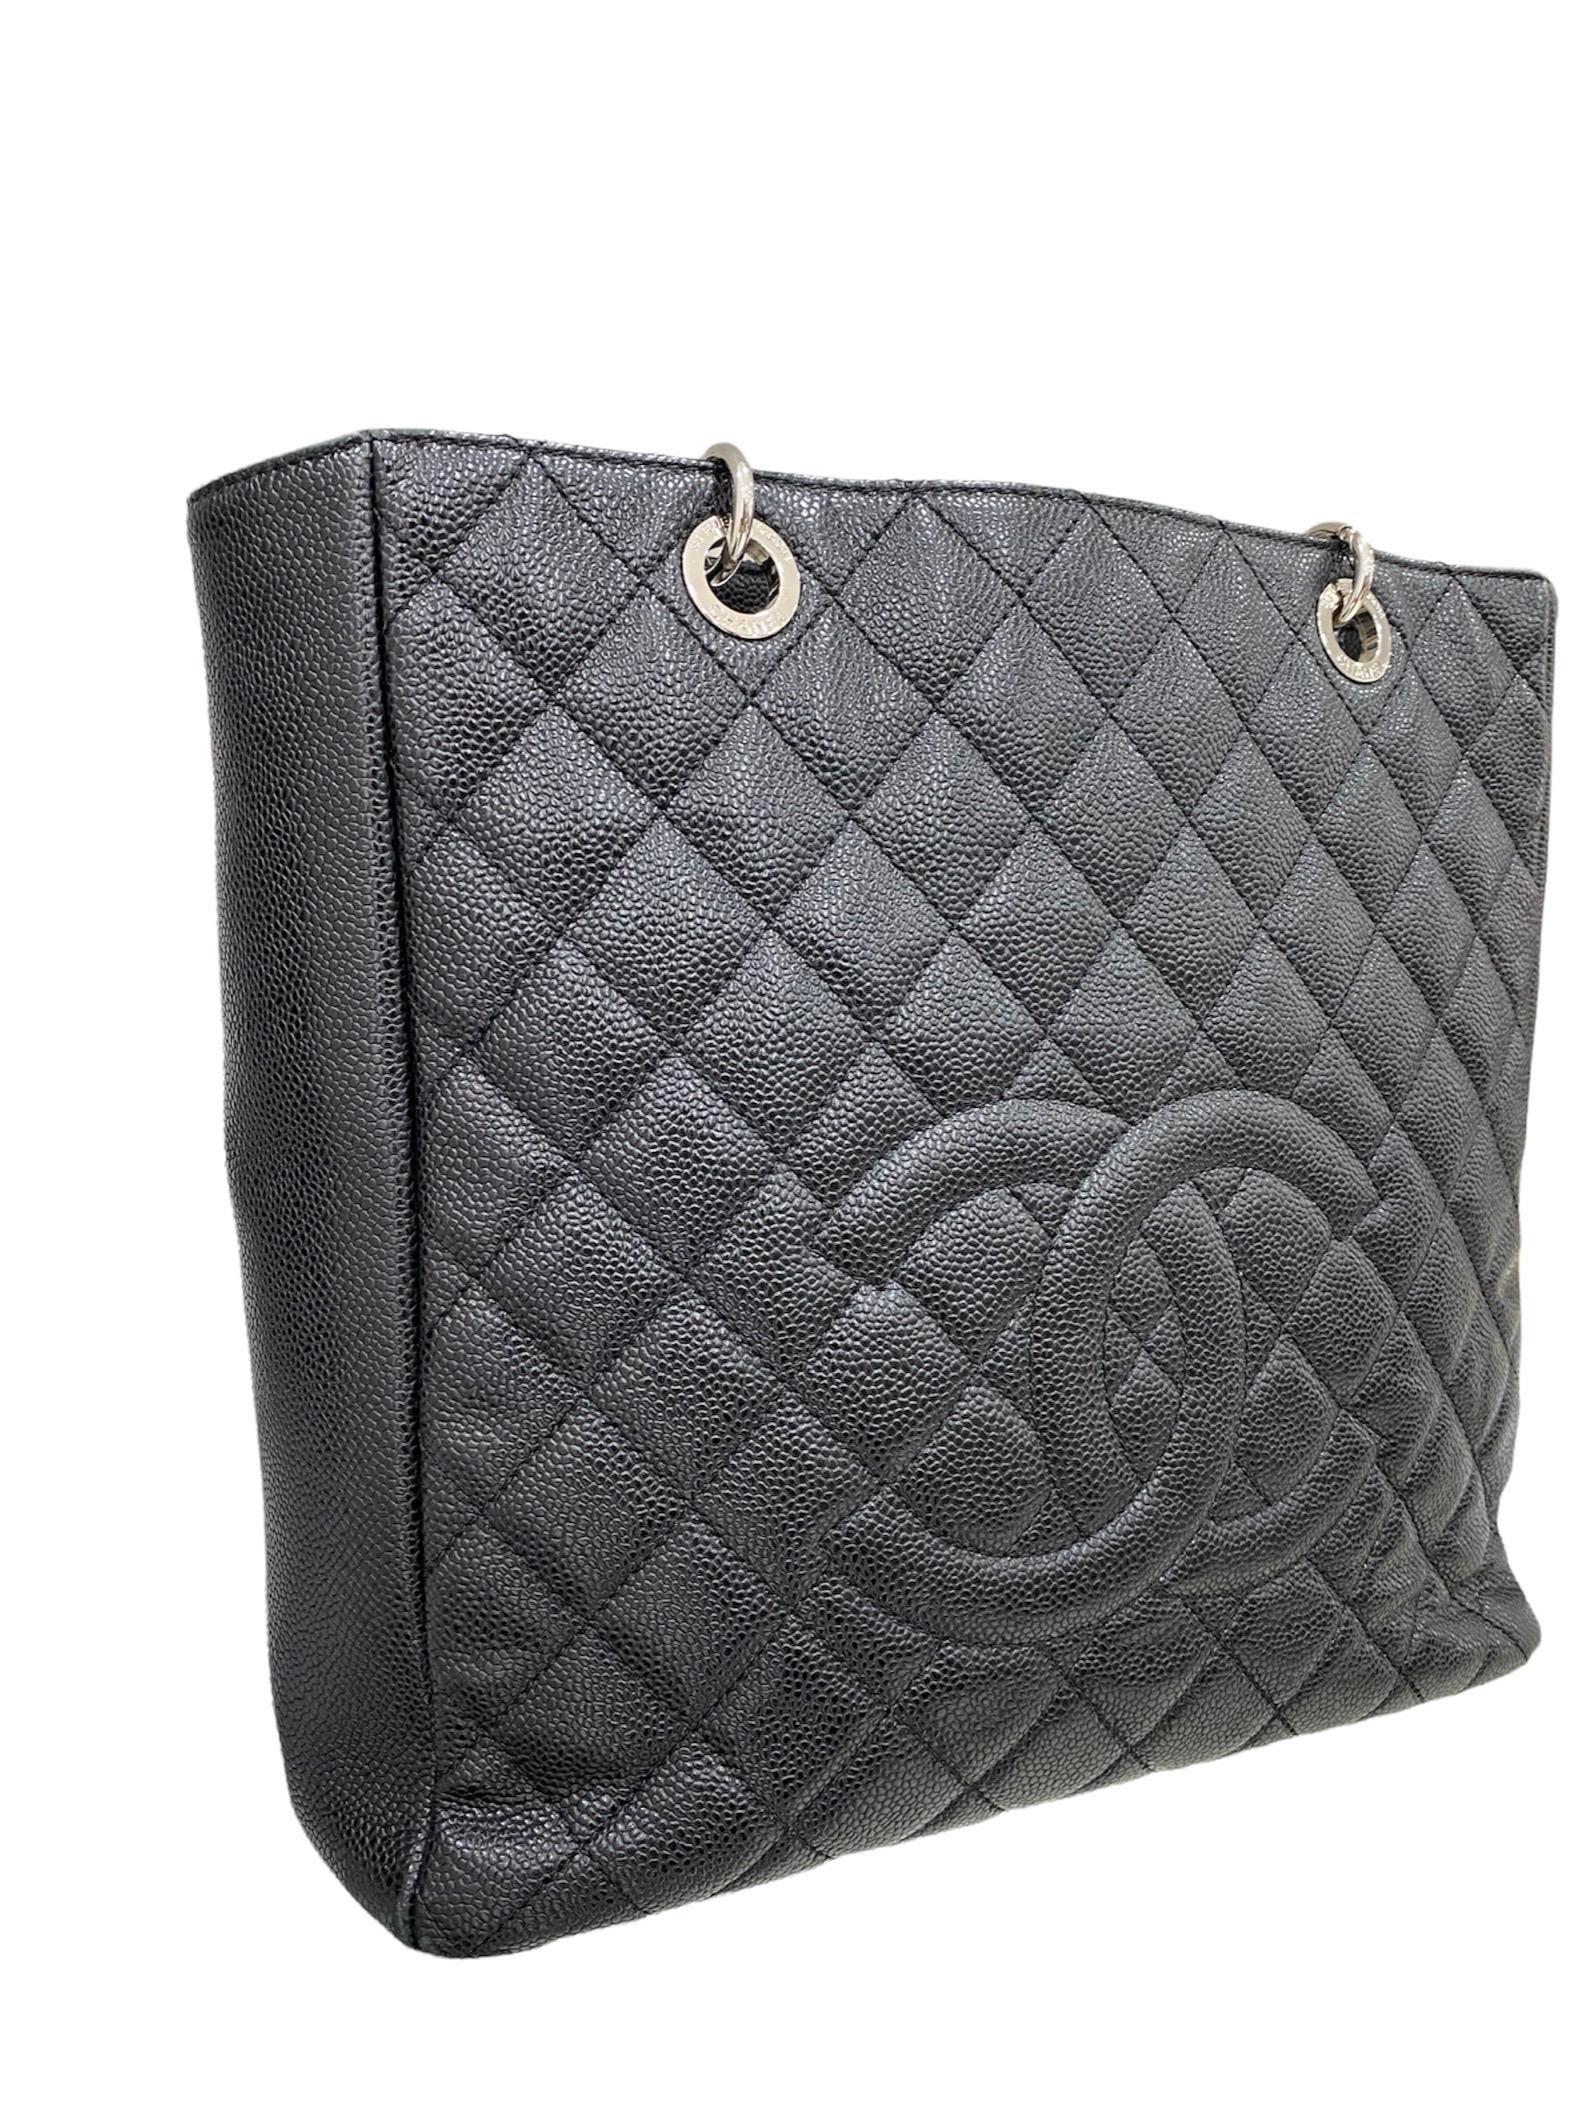 Chanel signed bag, PST model, made of black caviar leather with silver hardware. Equipped with a central closure with magnetic button, internally lined in black fabric, very roomy. Equipped with double shoulder handle in intertwined leather and